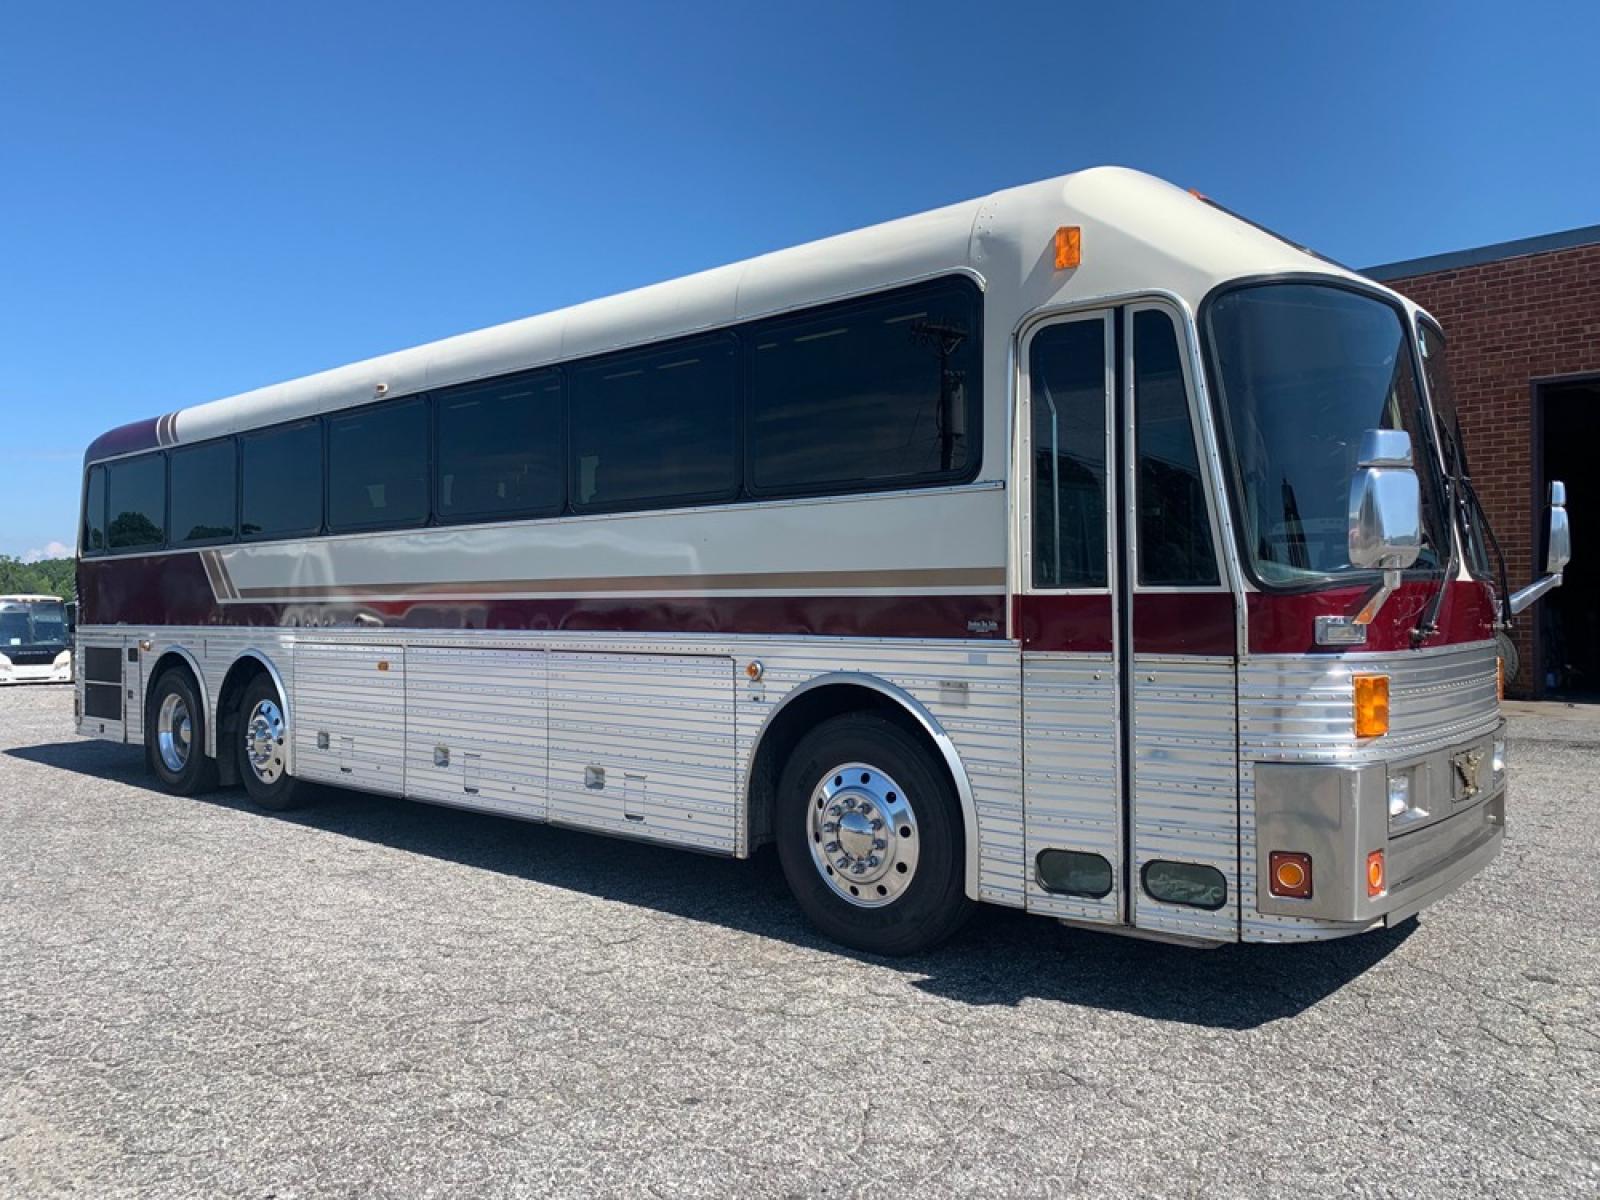 1996 White Eagle 15 Series with an Detroit Diesel Series 60 engine, Allison transmission, 0.000000, 0.000000 - 1996 EAGLE 15 Series 40’- 60 Detroit Diesel Engine, - Allison Automatic Transmission - 46 Passengers - Electric Wipers - Electric Mirrors - Alloy Wheels - 4 Monitors & DVD - Enclosed Overhead Racks – Restroom - Photo #0